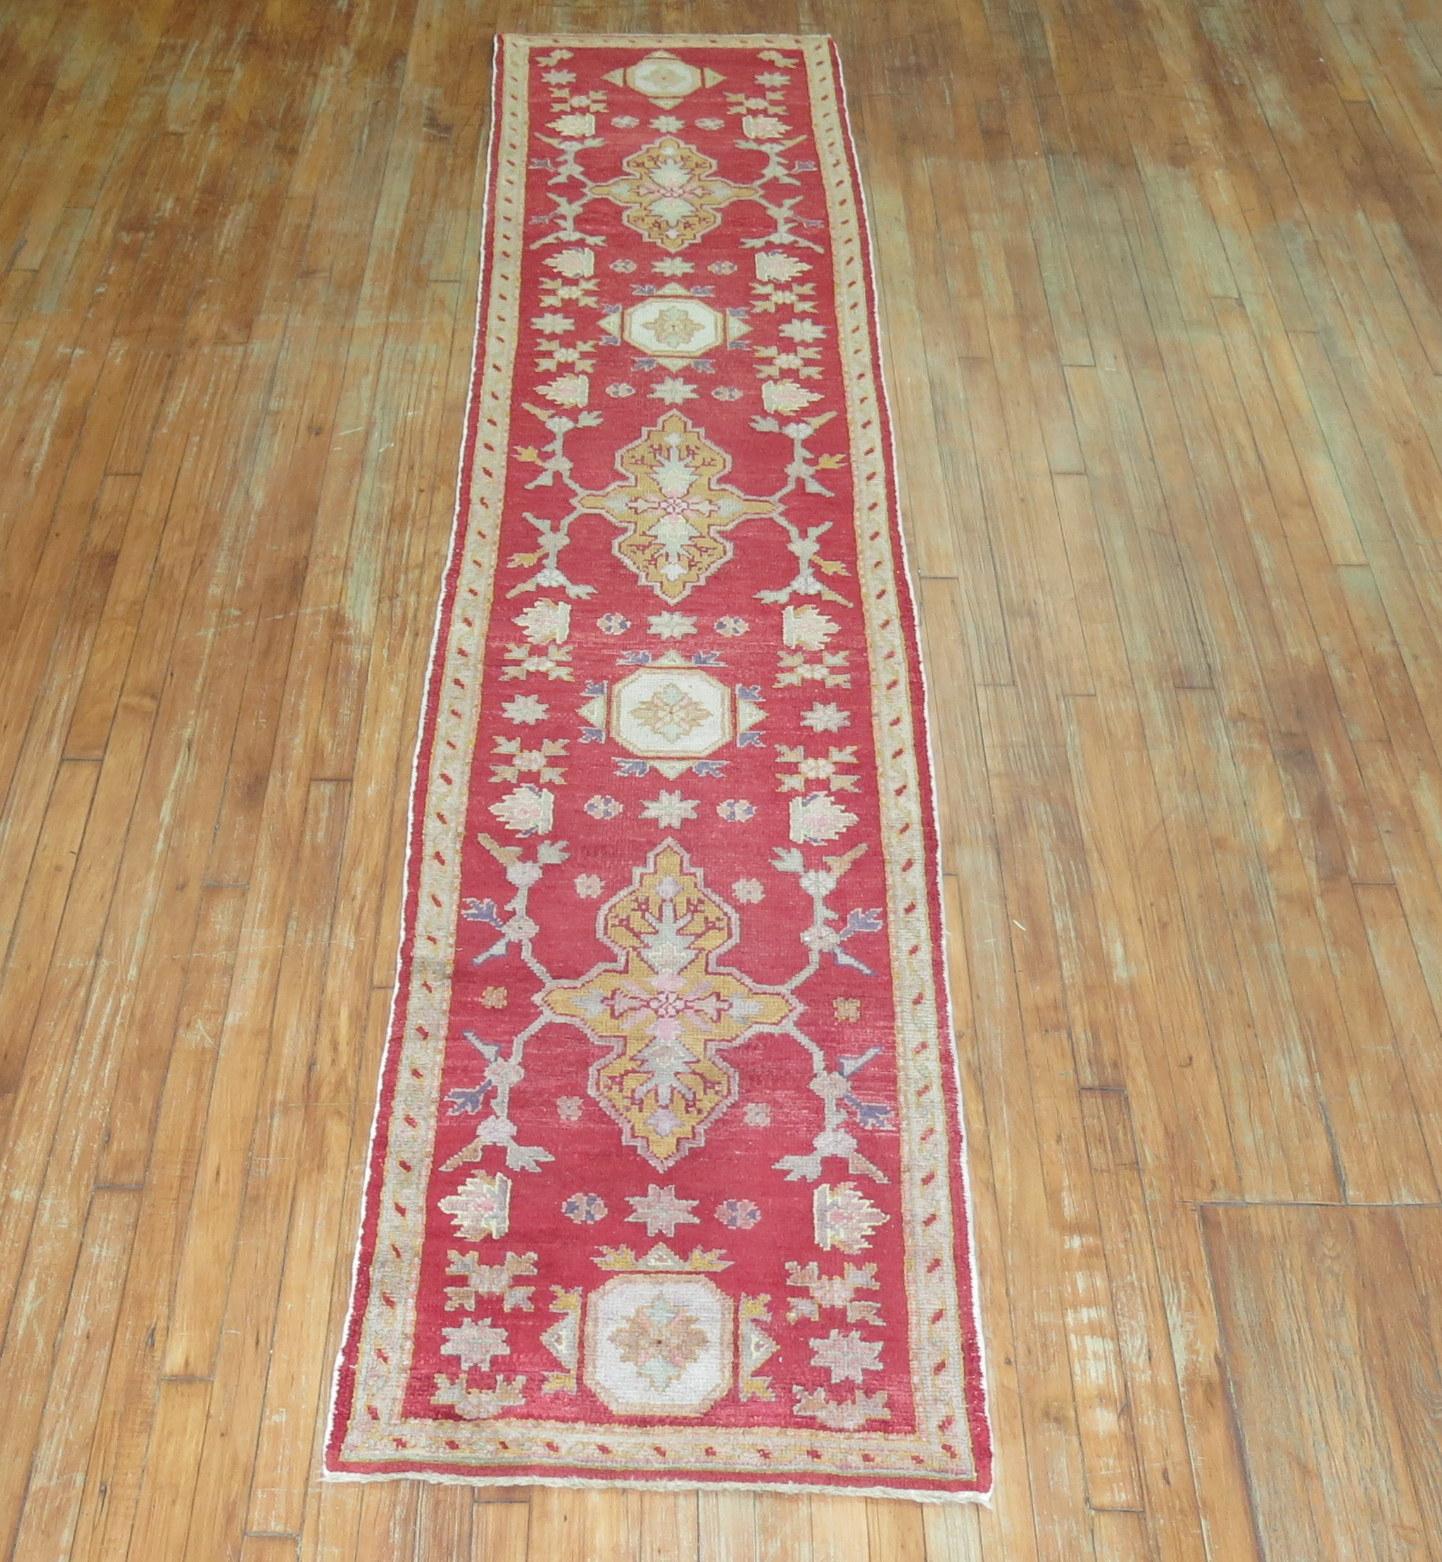 Antique Turkish Oushak runner with multiple medallions on a bright red field.